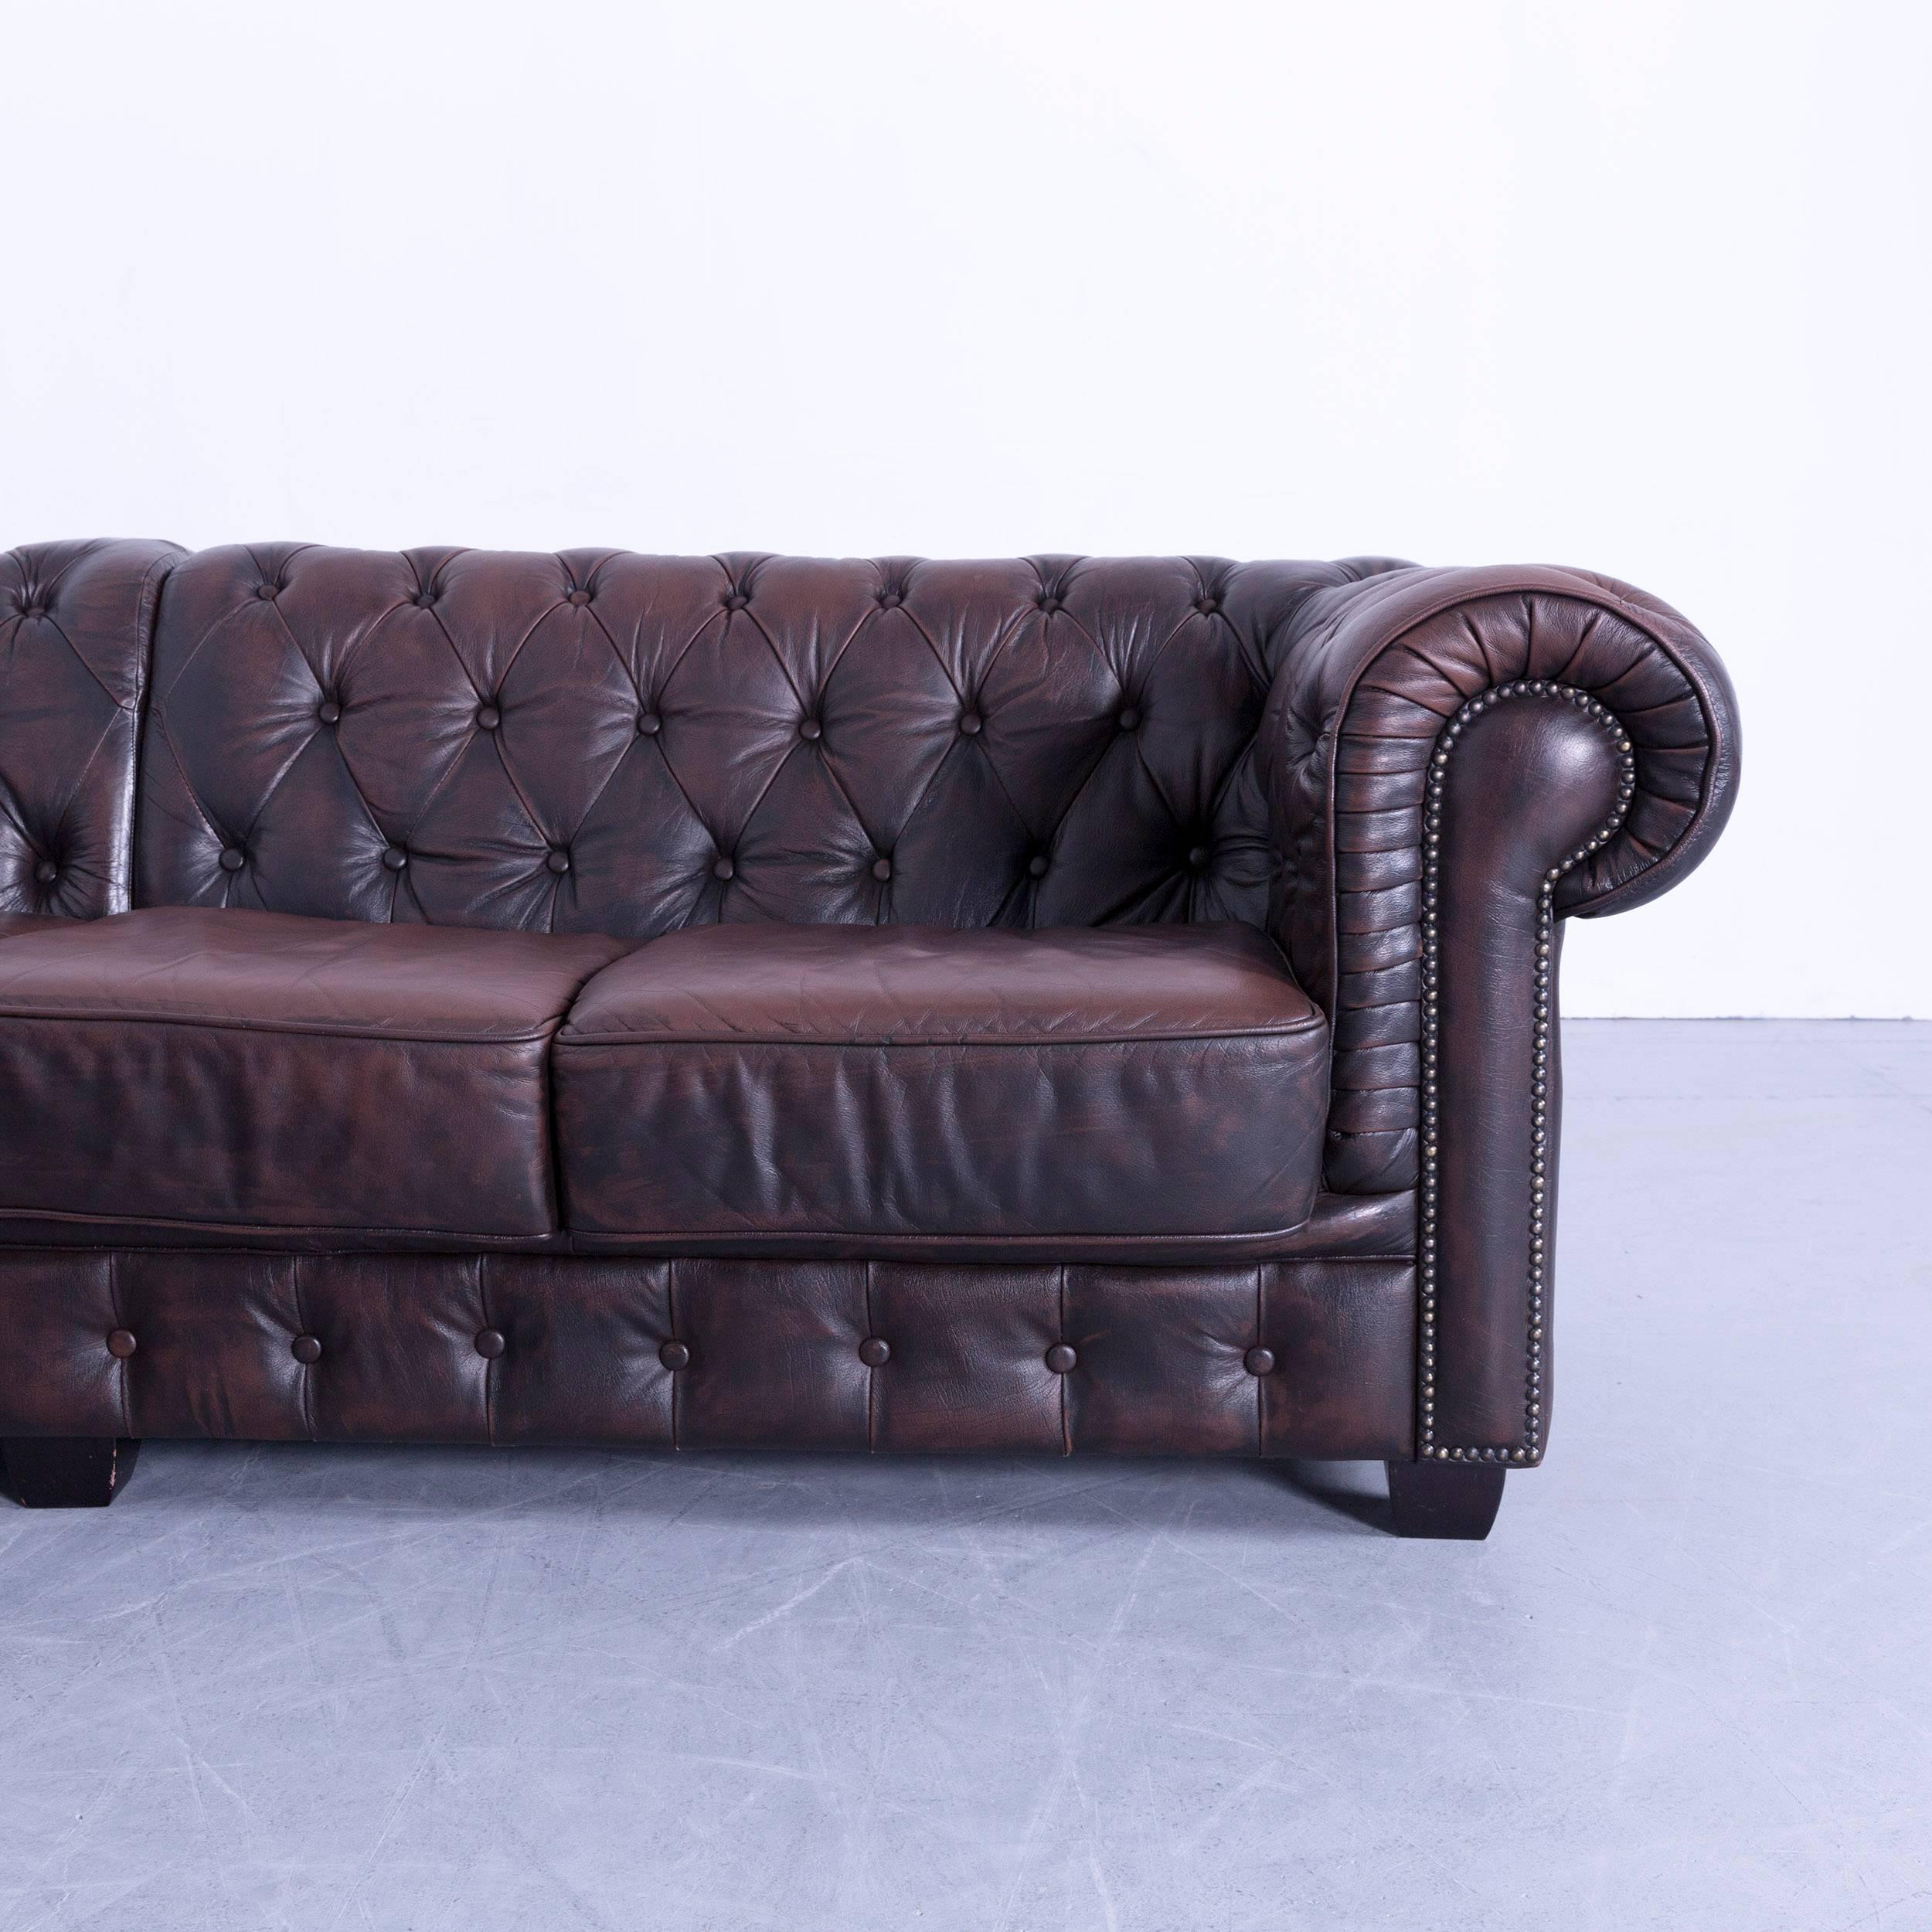 Chesterfield corner sofa brown leather couch vintage rivets, made for pure comfort.